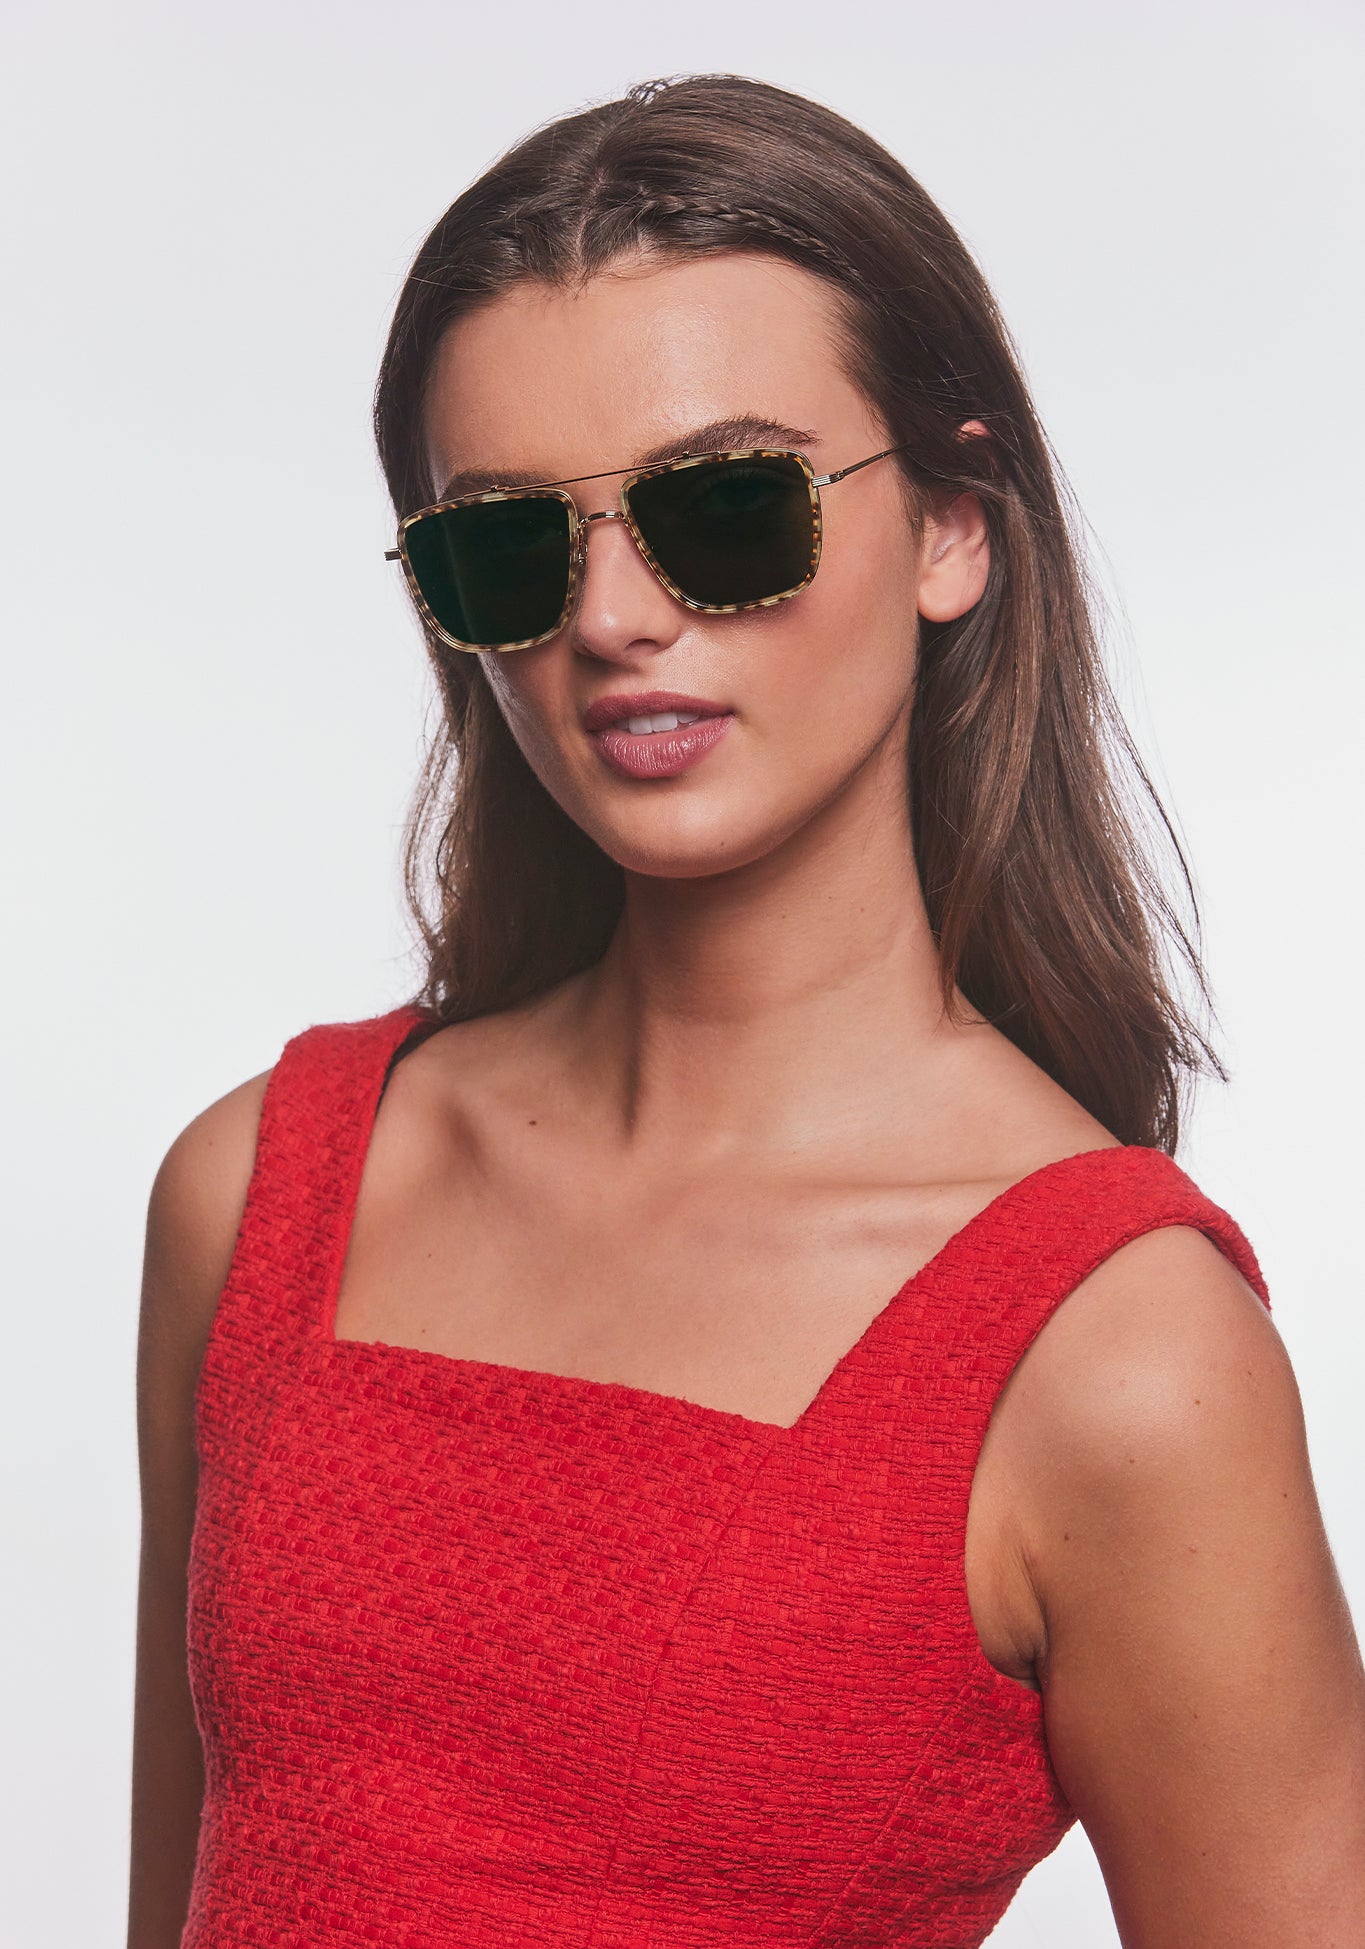 VAIL | 12K Titanium + Esox Handcrafted, luxury brown tortoise acetate and stainless steel square oversized aviator KREWE sunglasses womens model | Model: Bentley